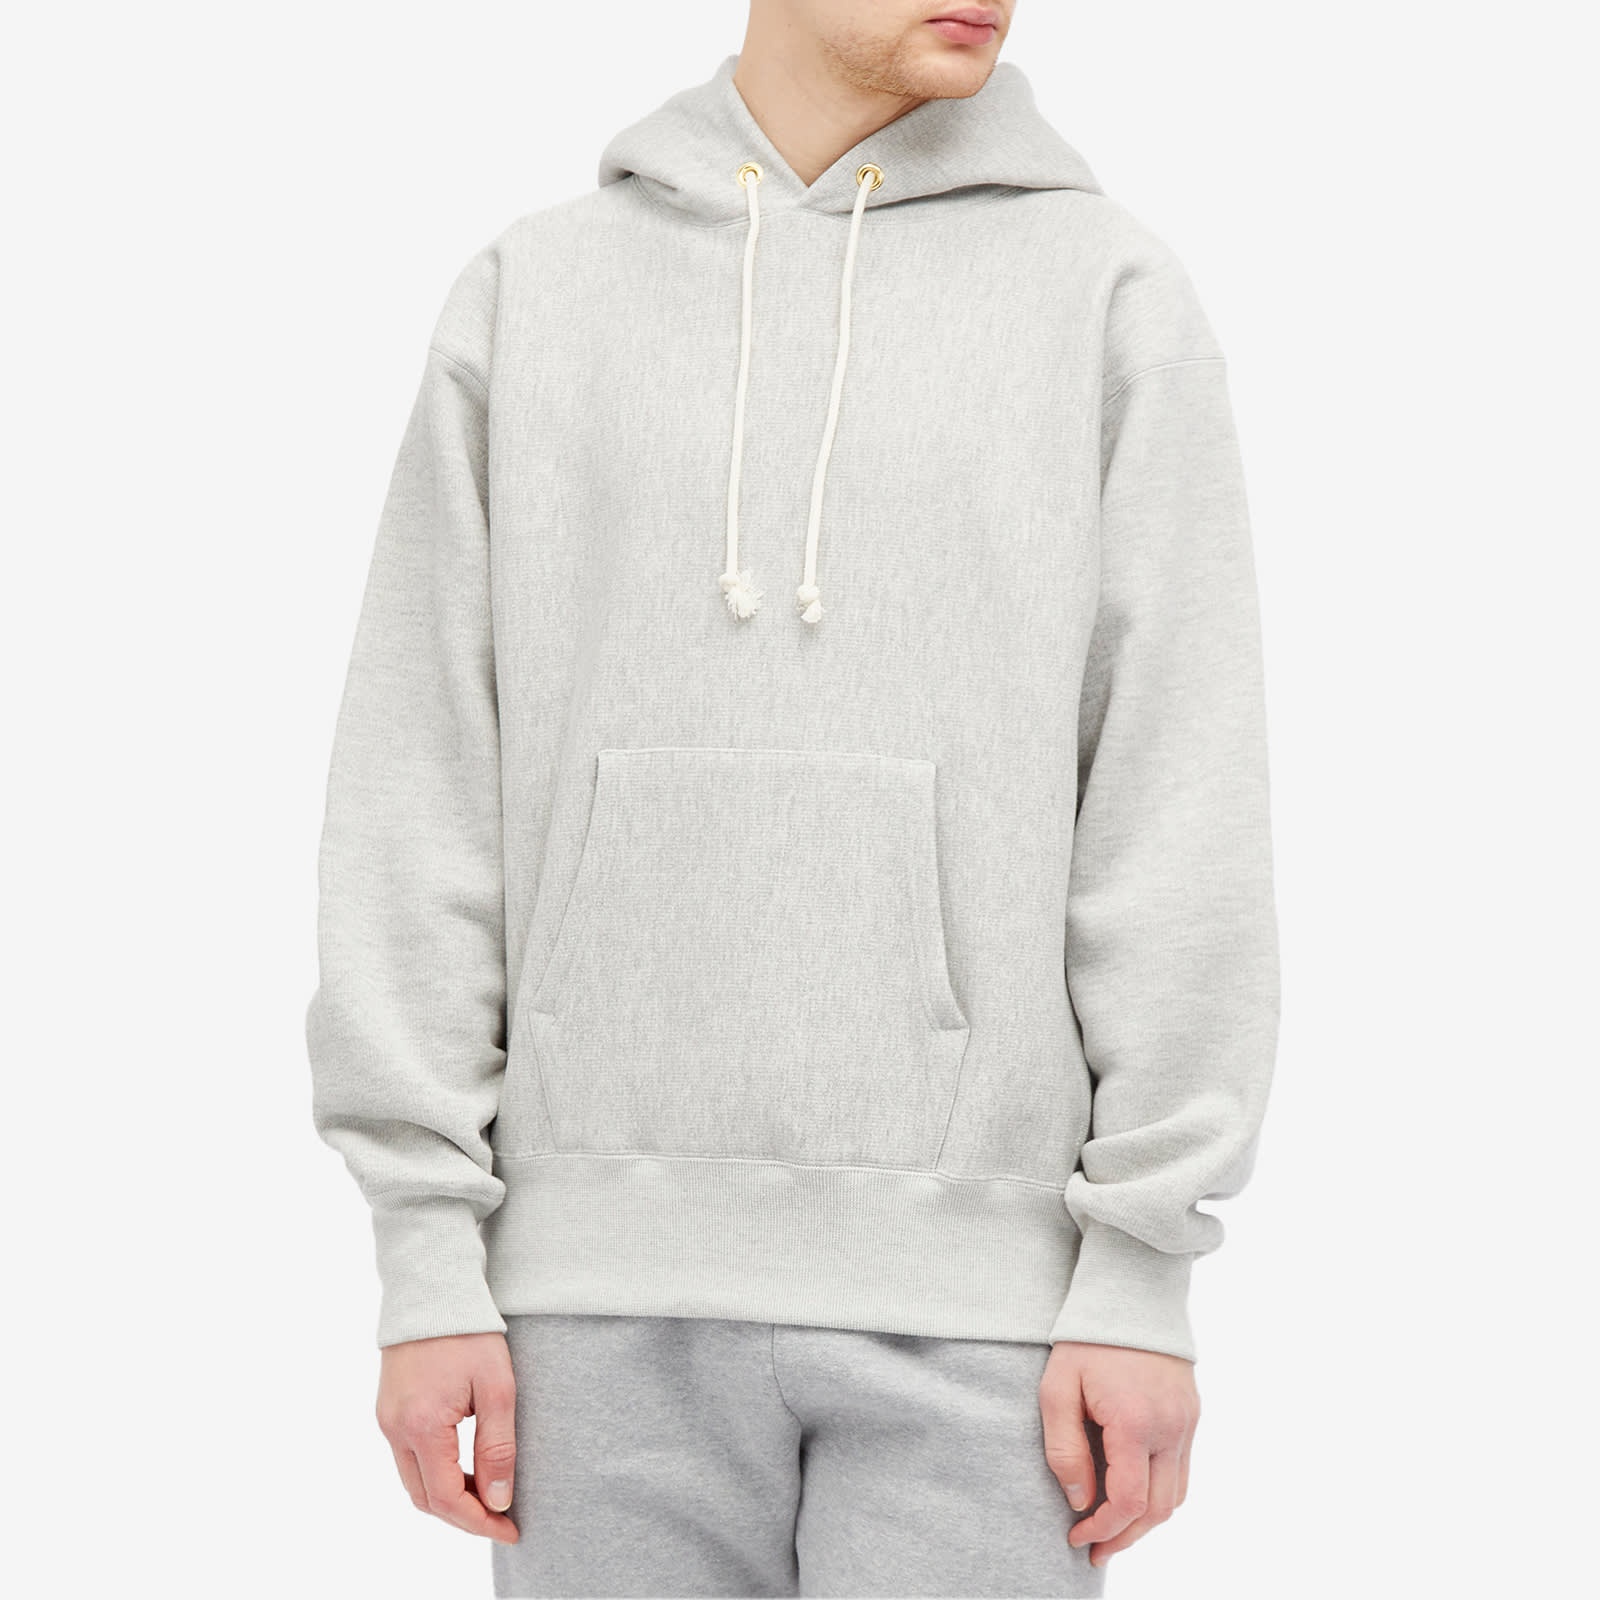 Champion Made in Japan Hoodie - 2